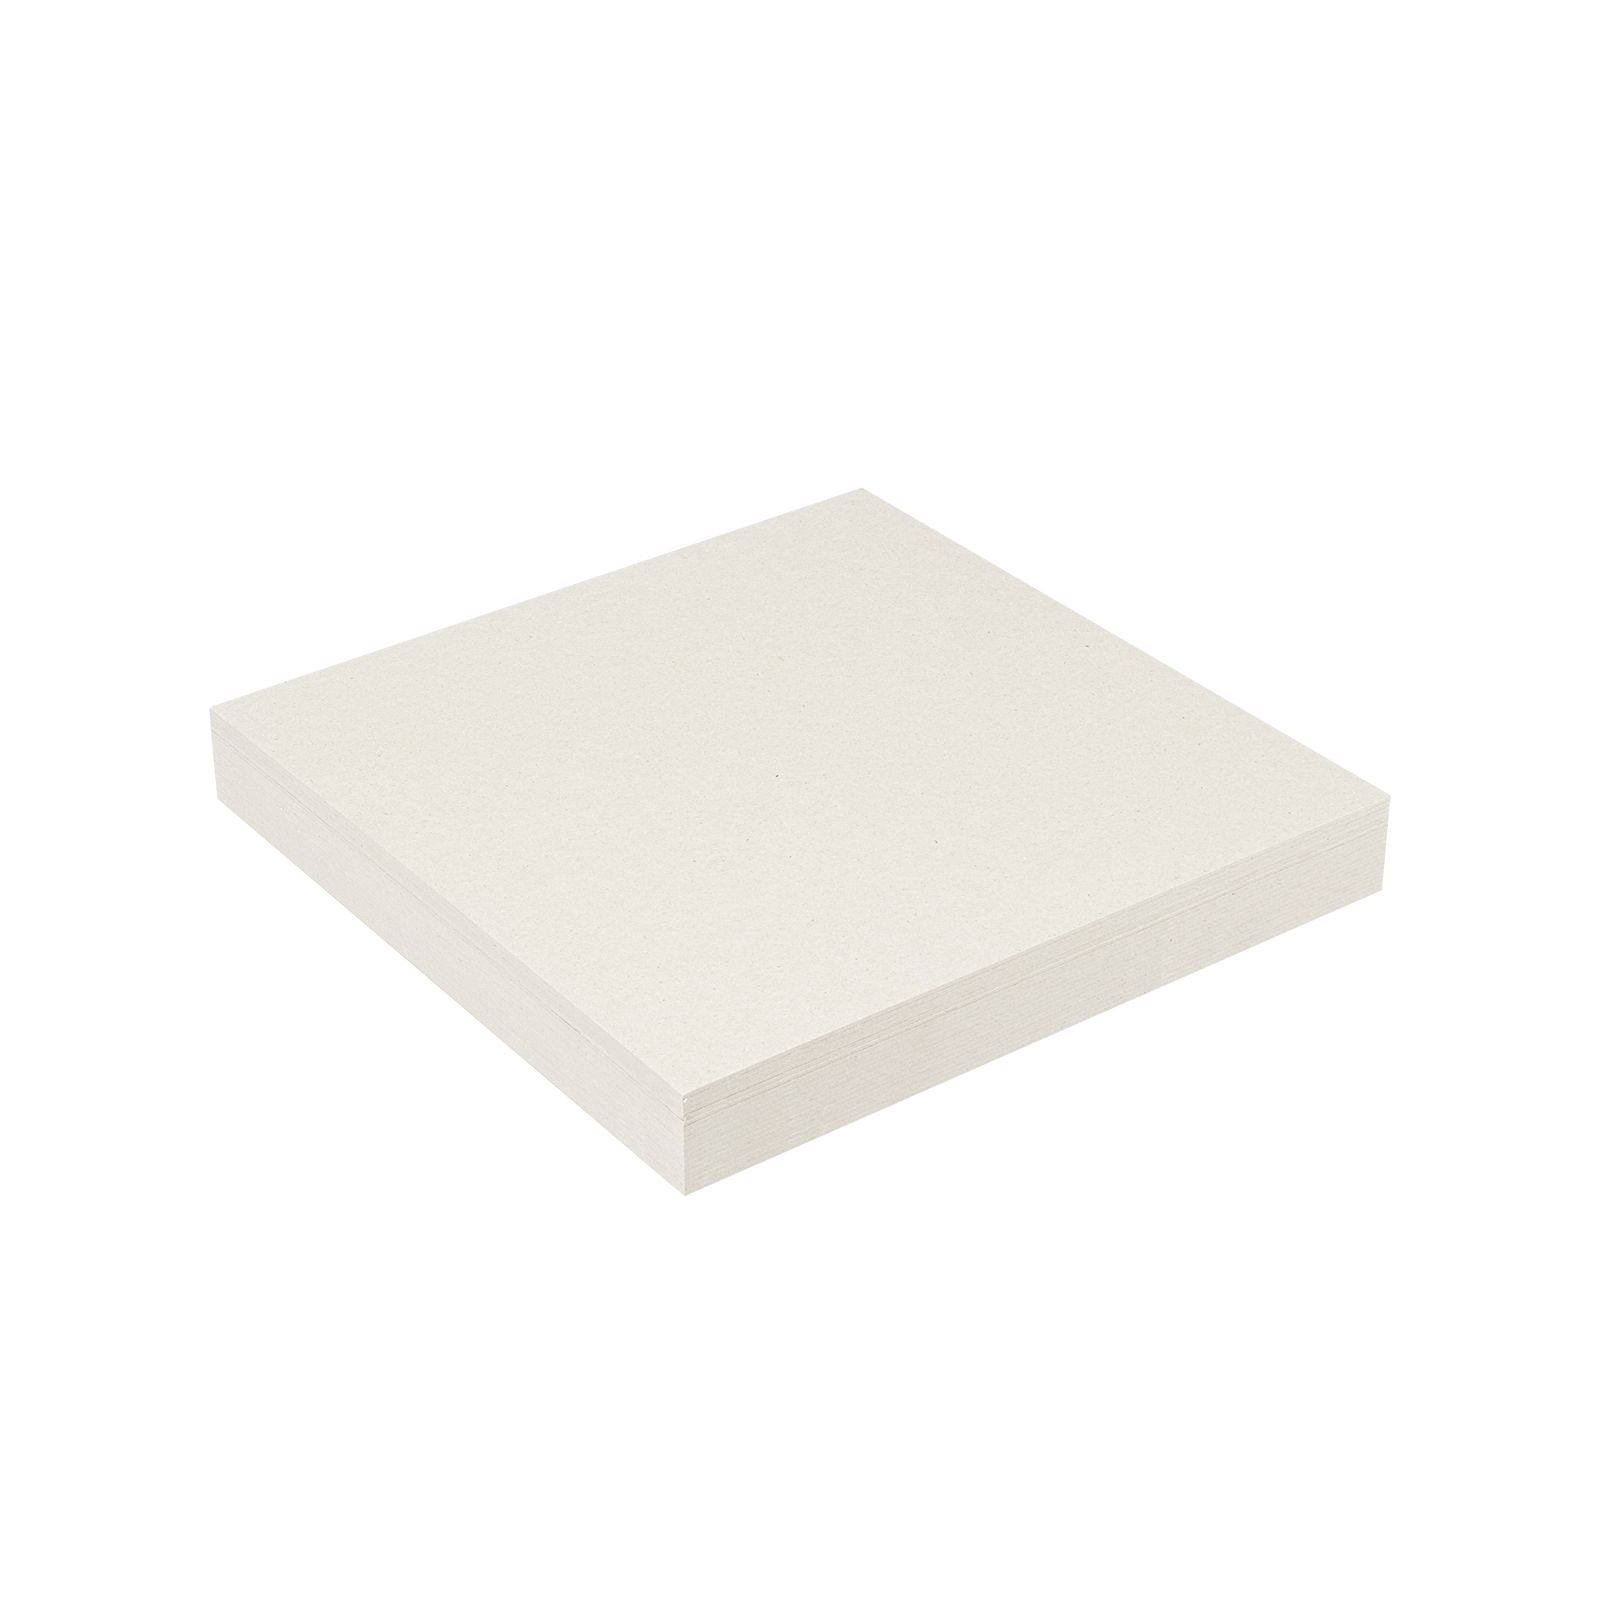 Florence • Graupappe 2mm 30,5x30,5cm 20x